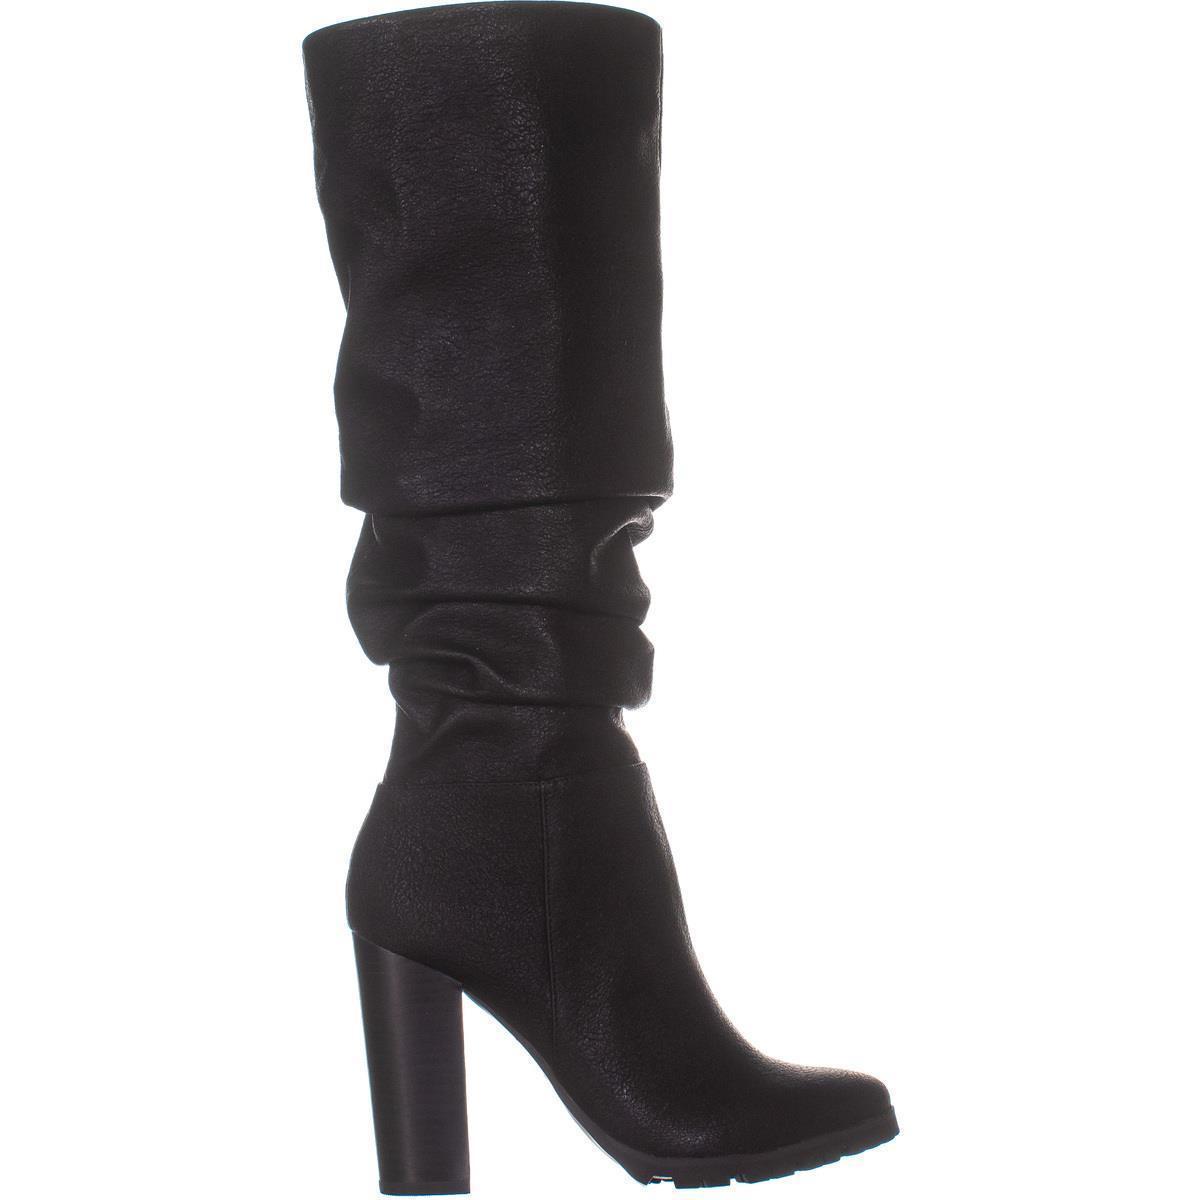 Katy Perry The Oneil Chunky Heel Knee High Boots, Black - Boots